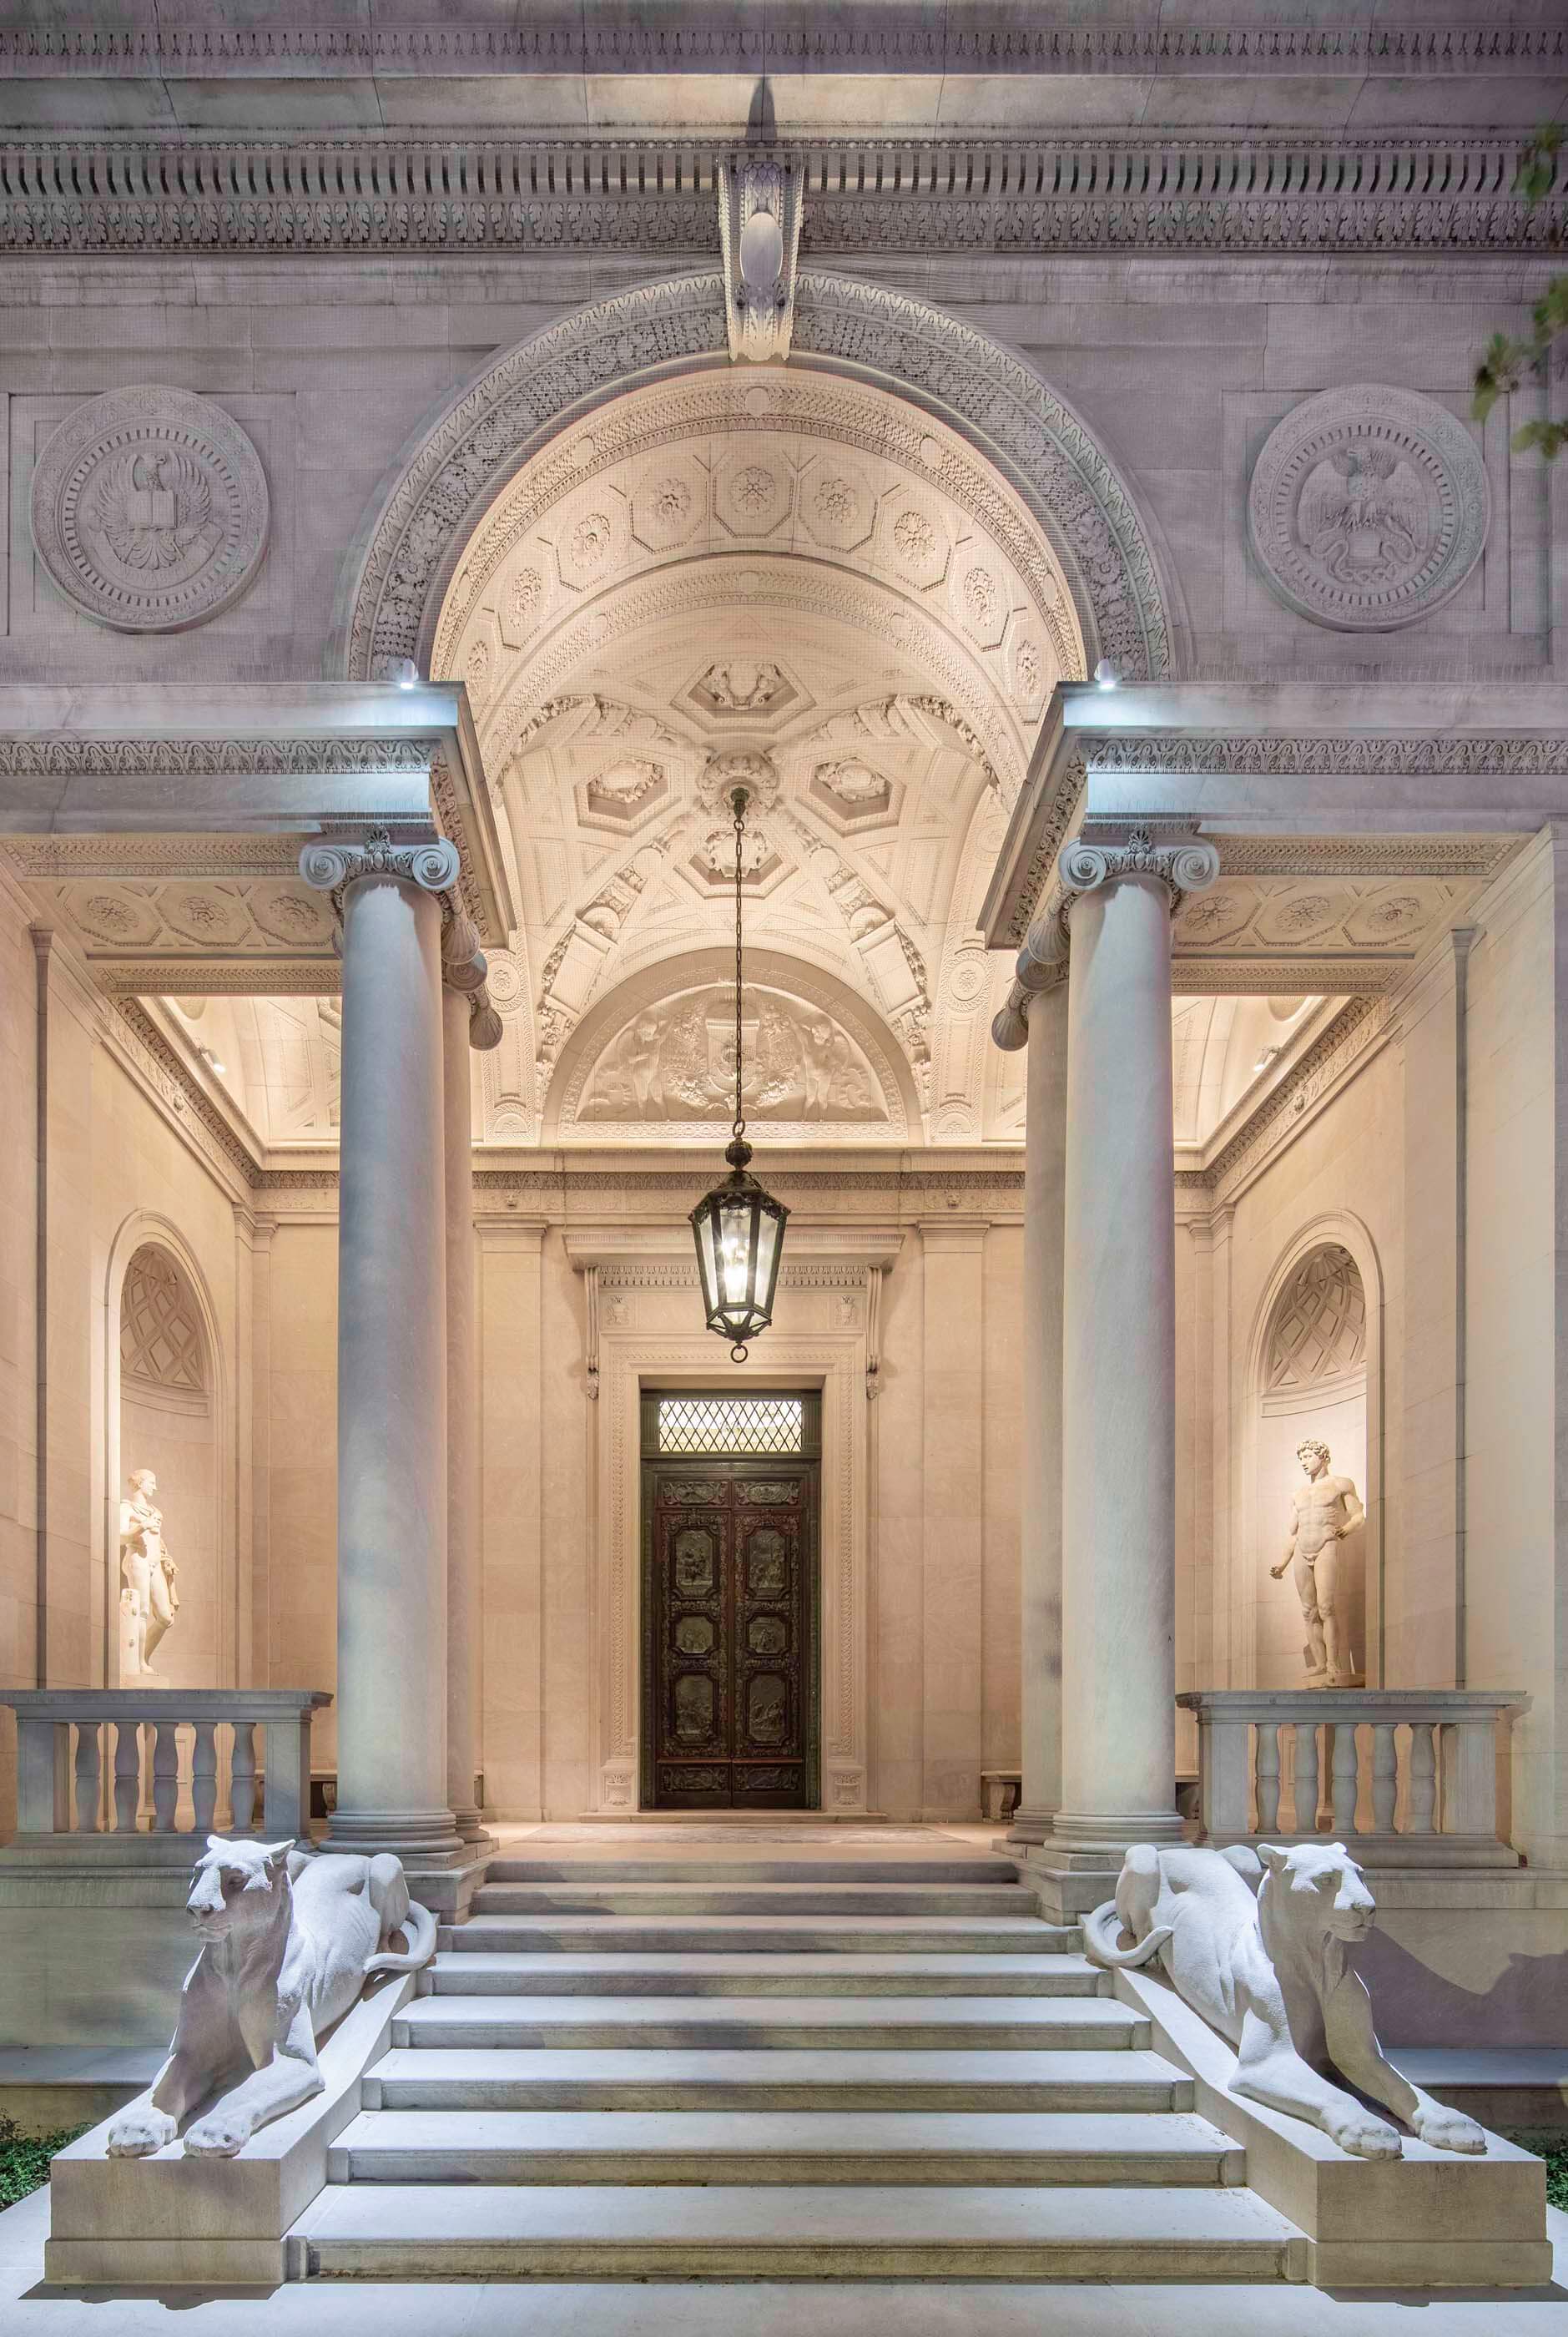 Restored columns and loggia on the Morgan Library